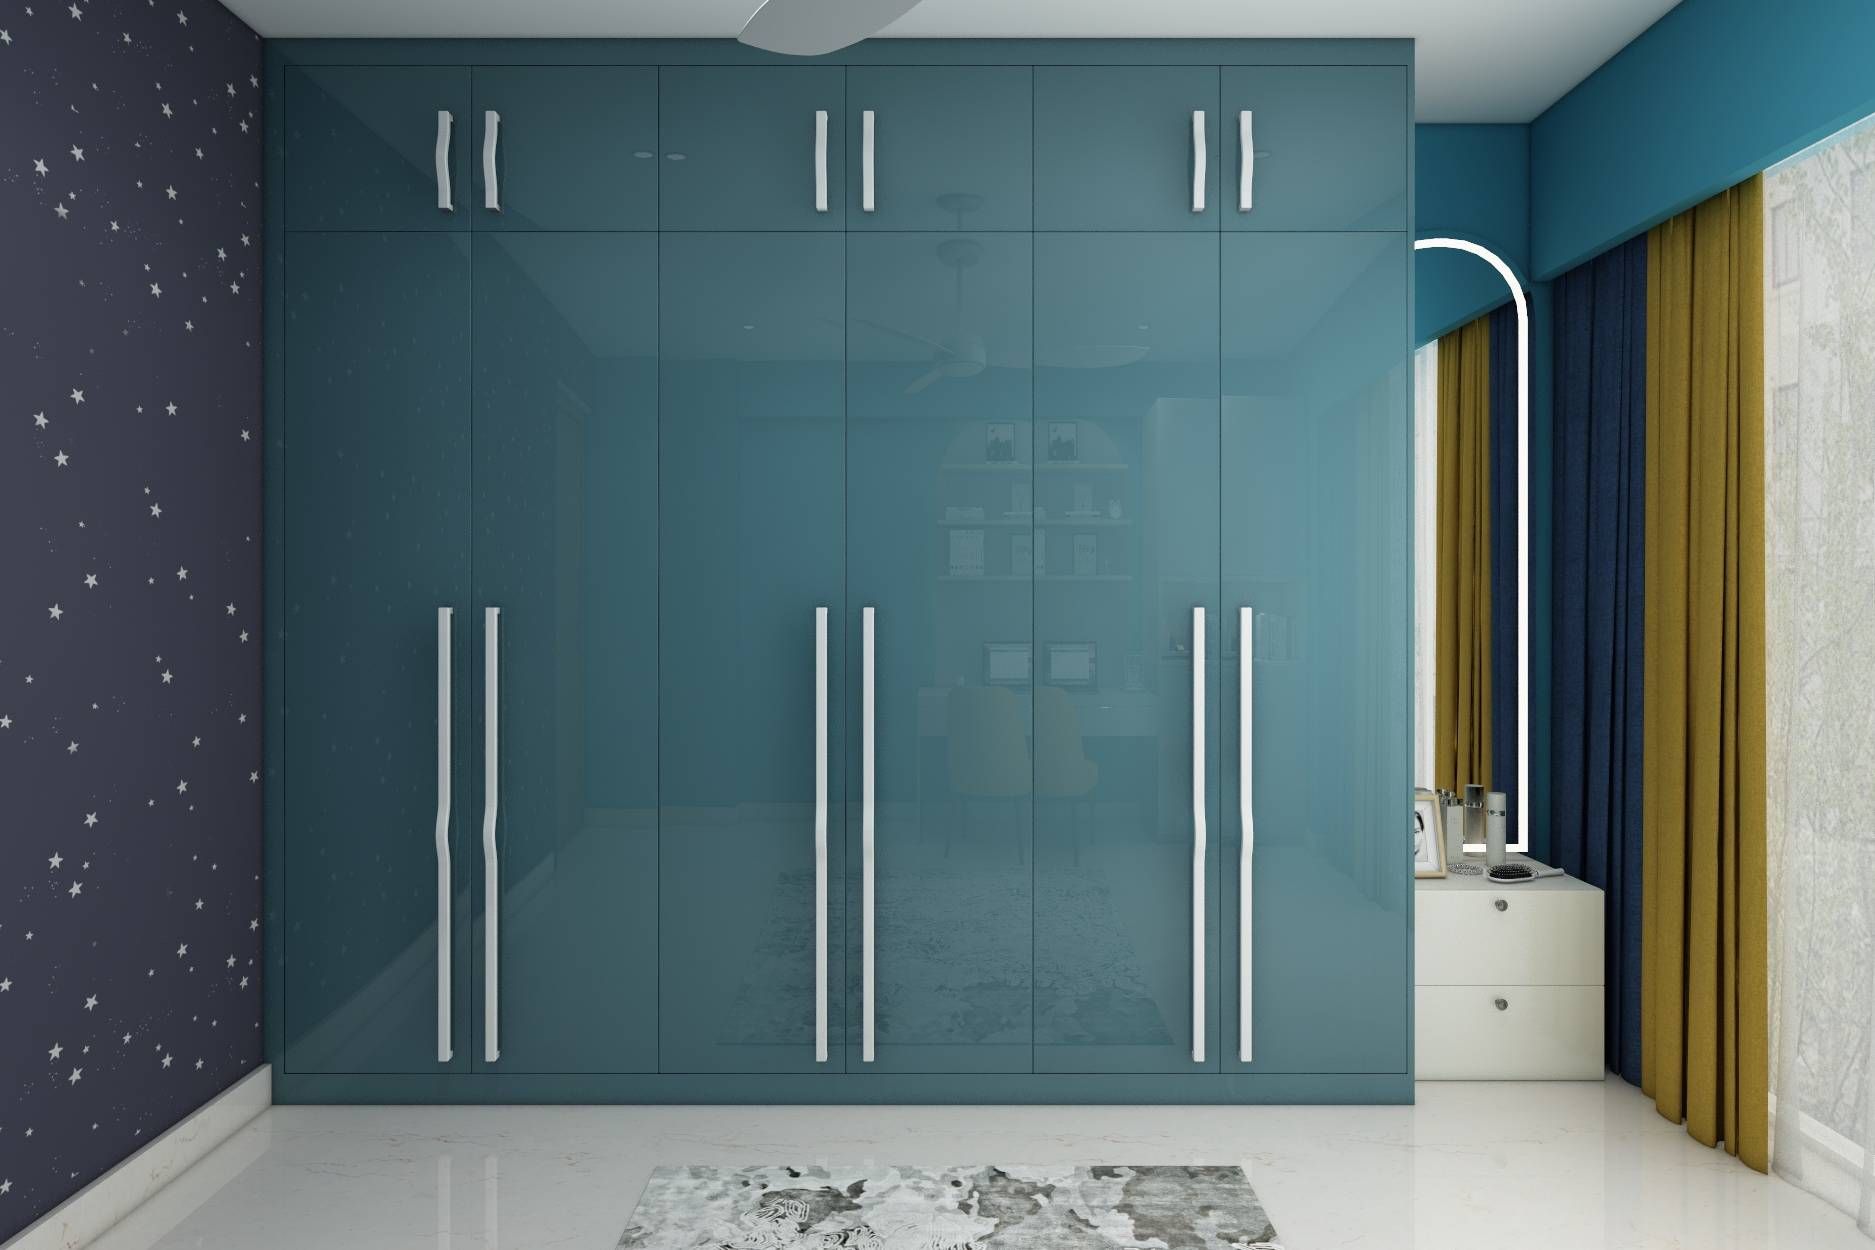 Teal Blue Modern Wardrobe Design With A White Dresser On The Side